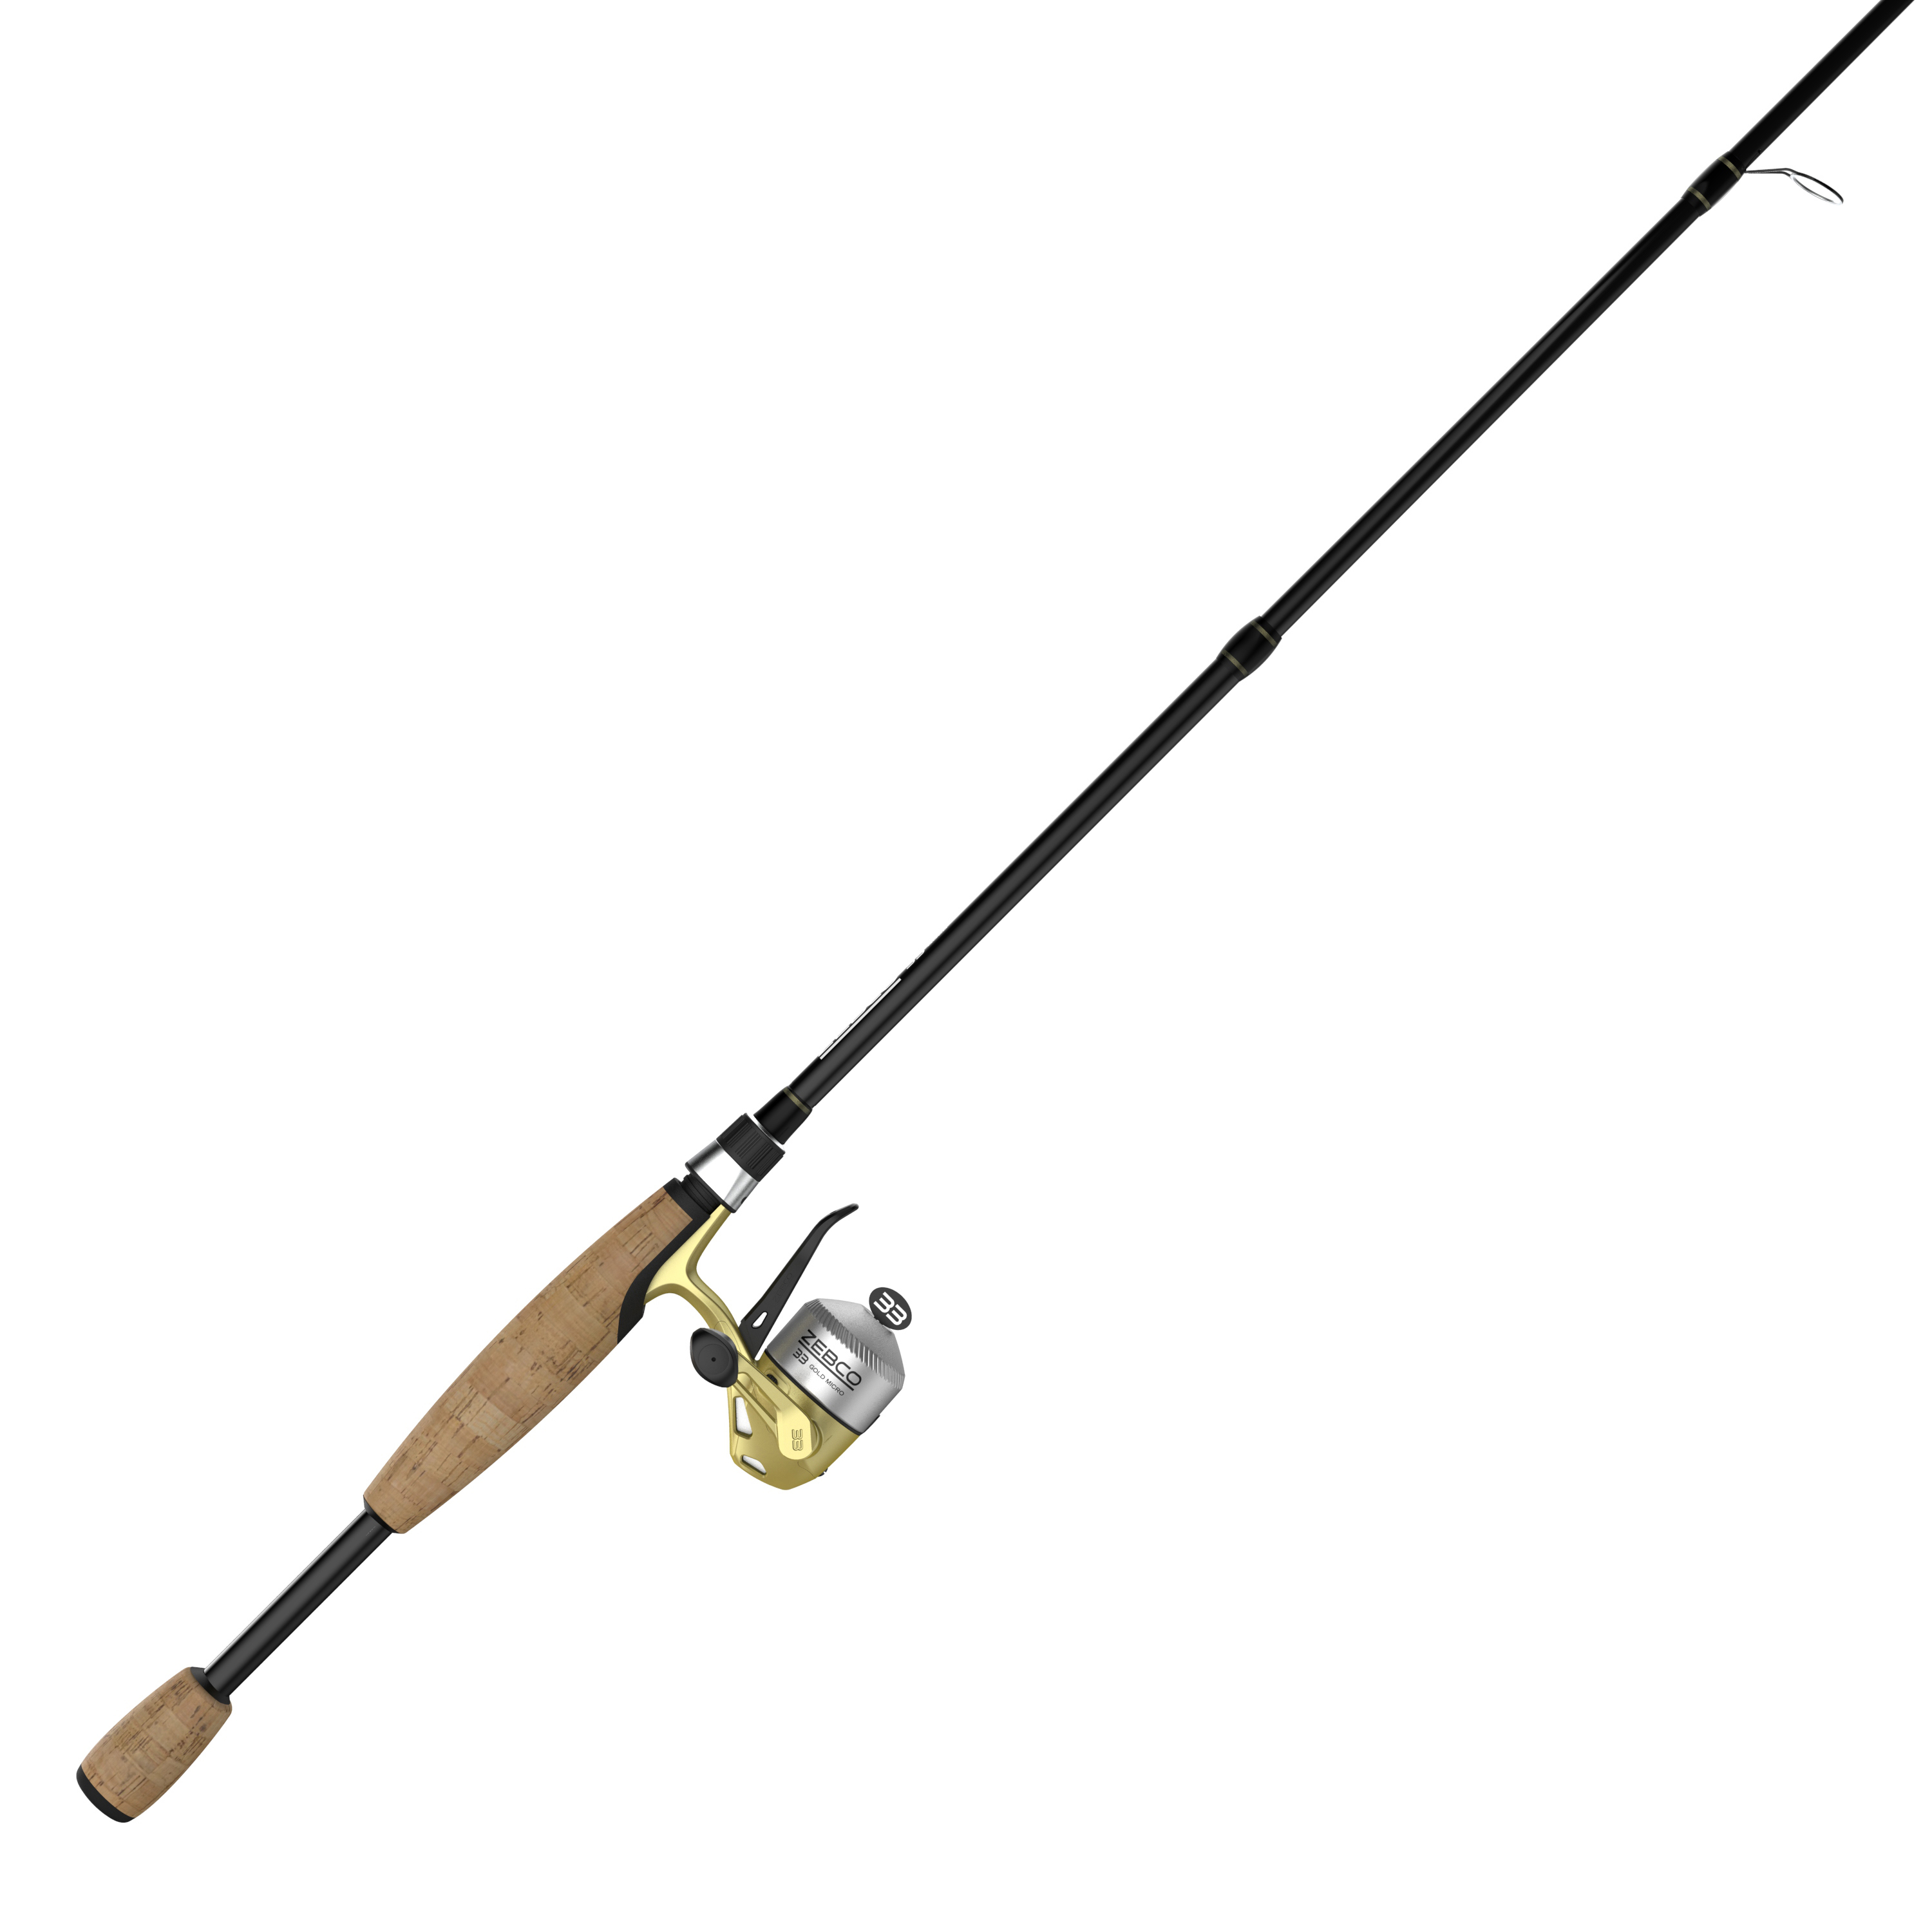 Zebco 33 Micro Trigger 5 ft UL Freshwater Triggerspin Rod and Reel Combo